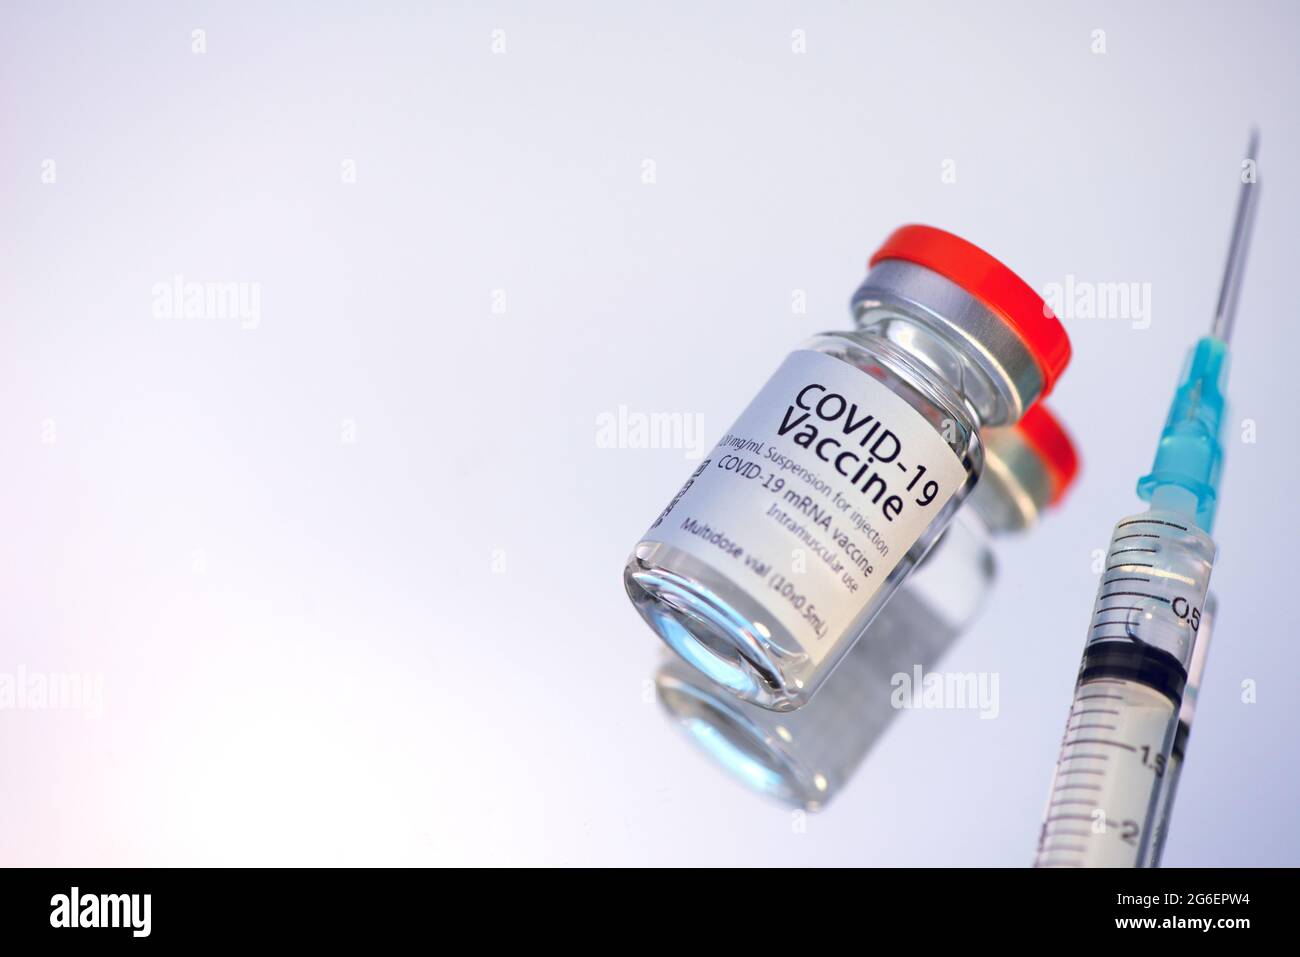 Ampoules with COVID-19 coronavirus vaccine, with a syringe for vaccination. Healthcare And Medical concept. Stock Photo